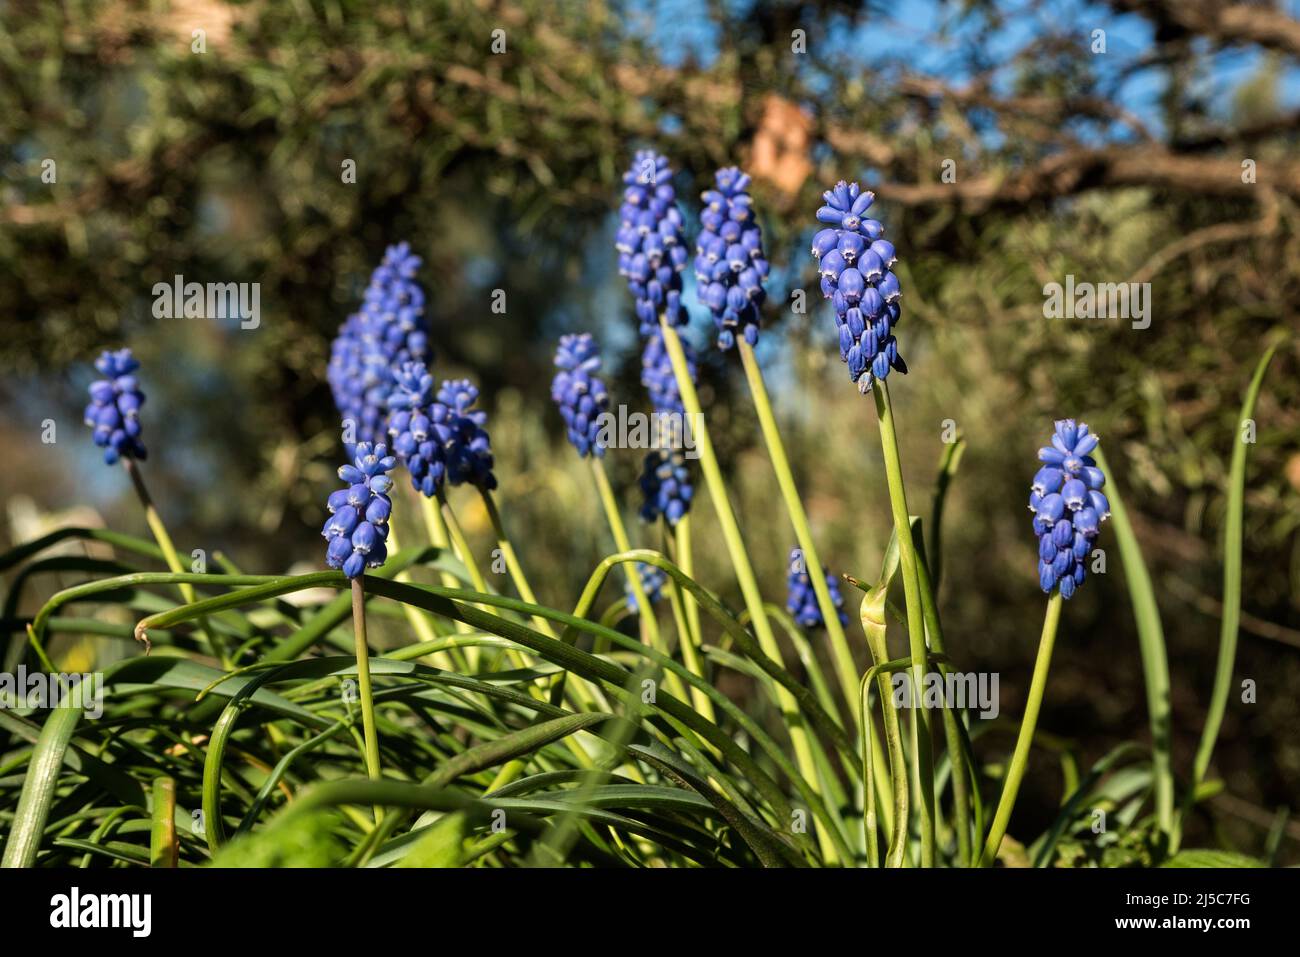 Grape Hyacinths - Muscari. Perennial bulbous plants native to Eurasia that produce spikes of blue urn-shaped flowers resembling bunches of grapes. Stock Photo